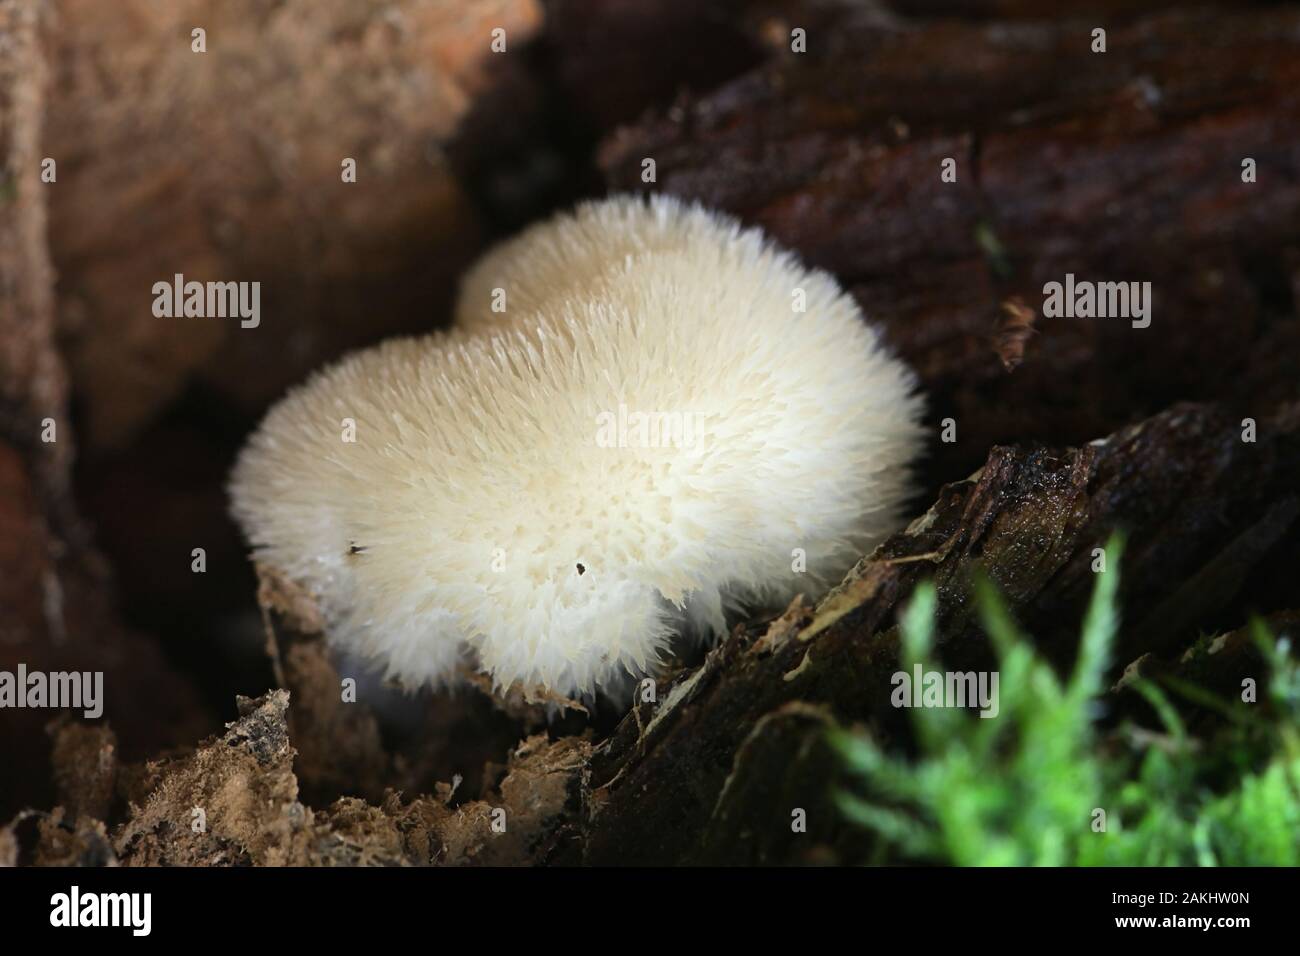 Postia ptychogaster, known as the powderpuff bracket, strange fungus from Finland Stock Photo